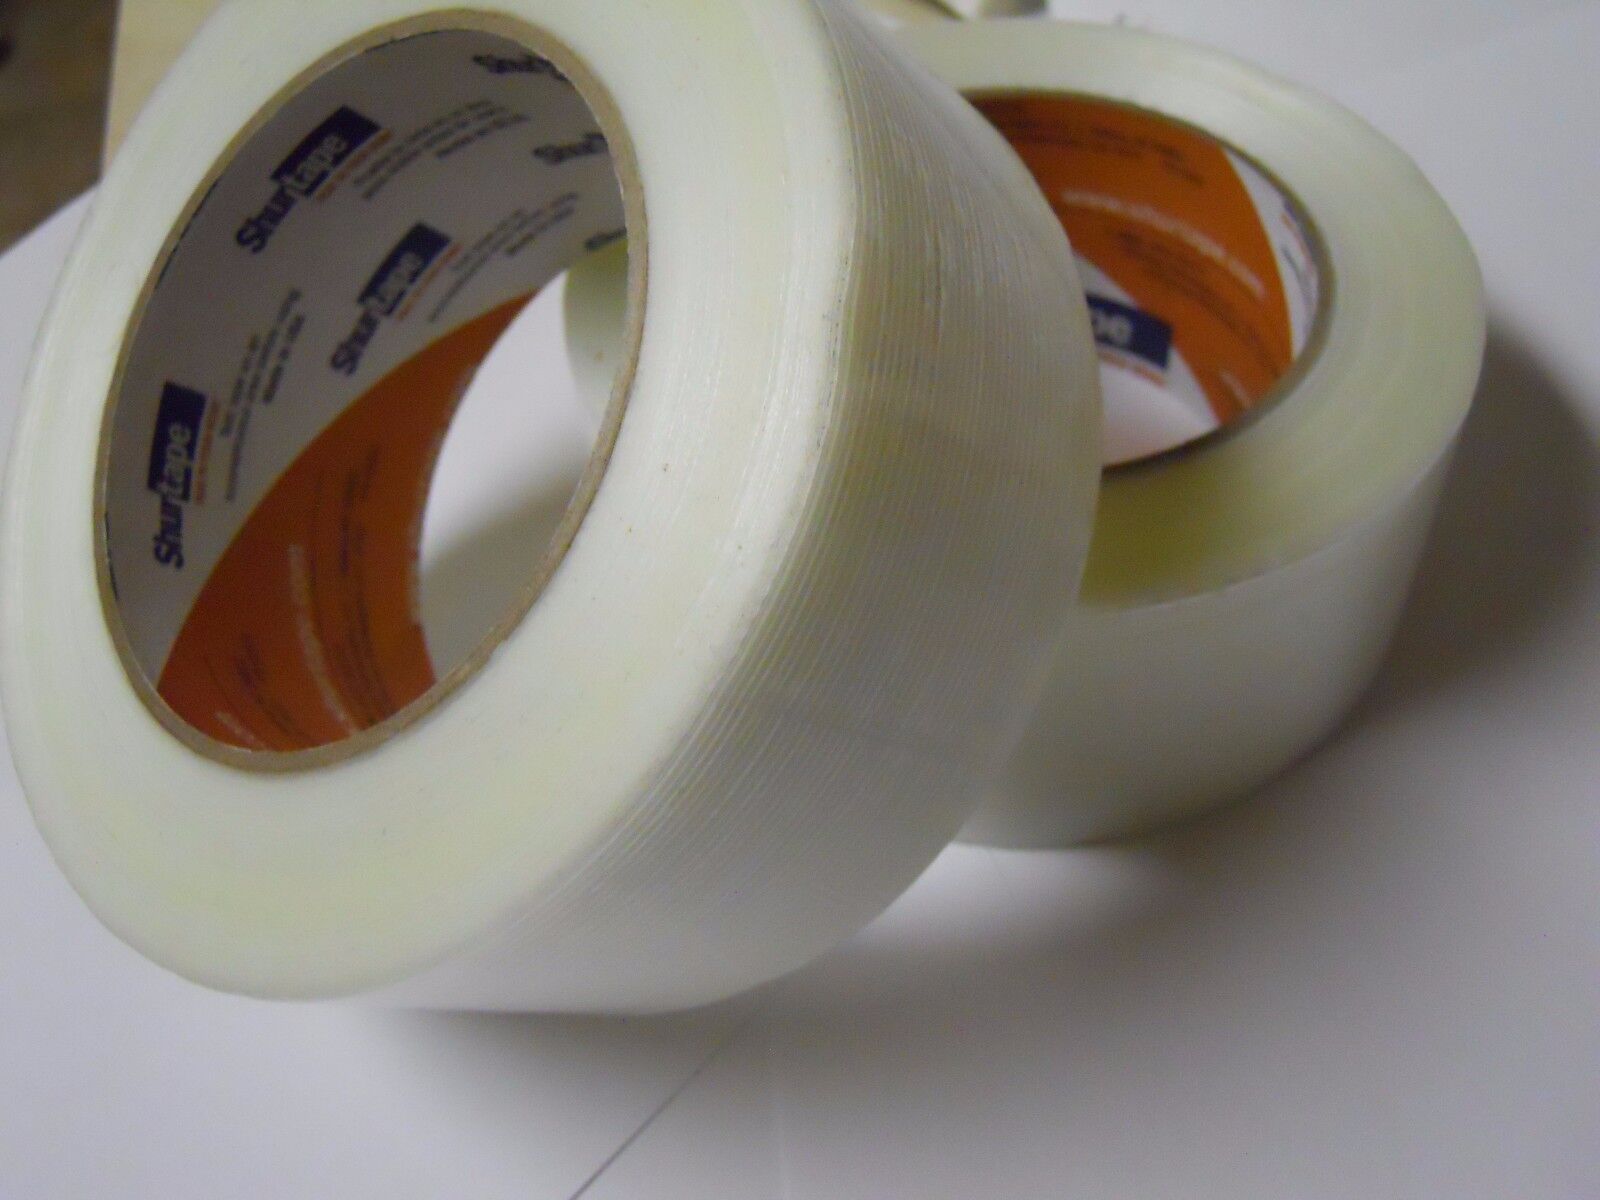 7 Rolls 2" x 60 YDS Fiberglass Reinforced Filament Strapping, Packing Tape Clear Unbranded/Generic Does Not Apply - фотография #3